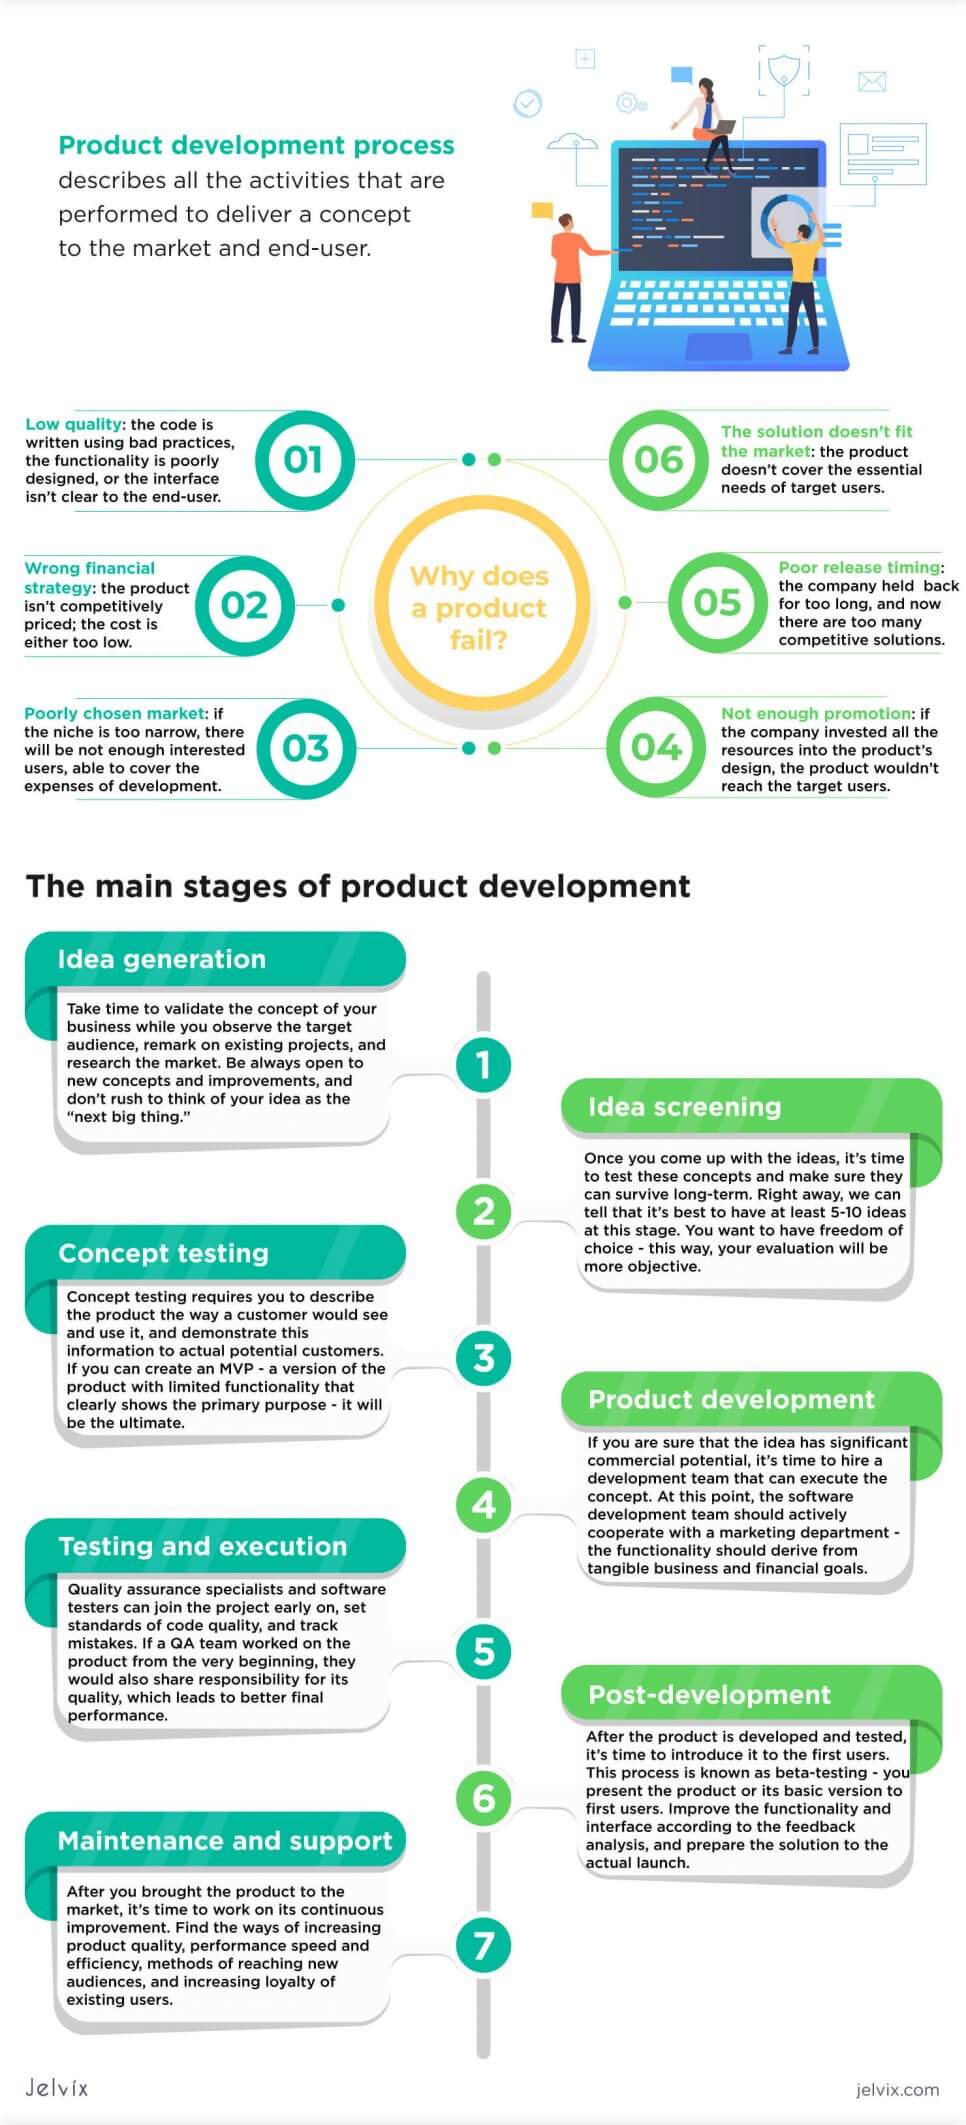 product development lifecycle infographic